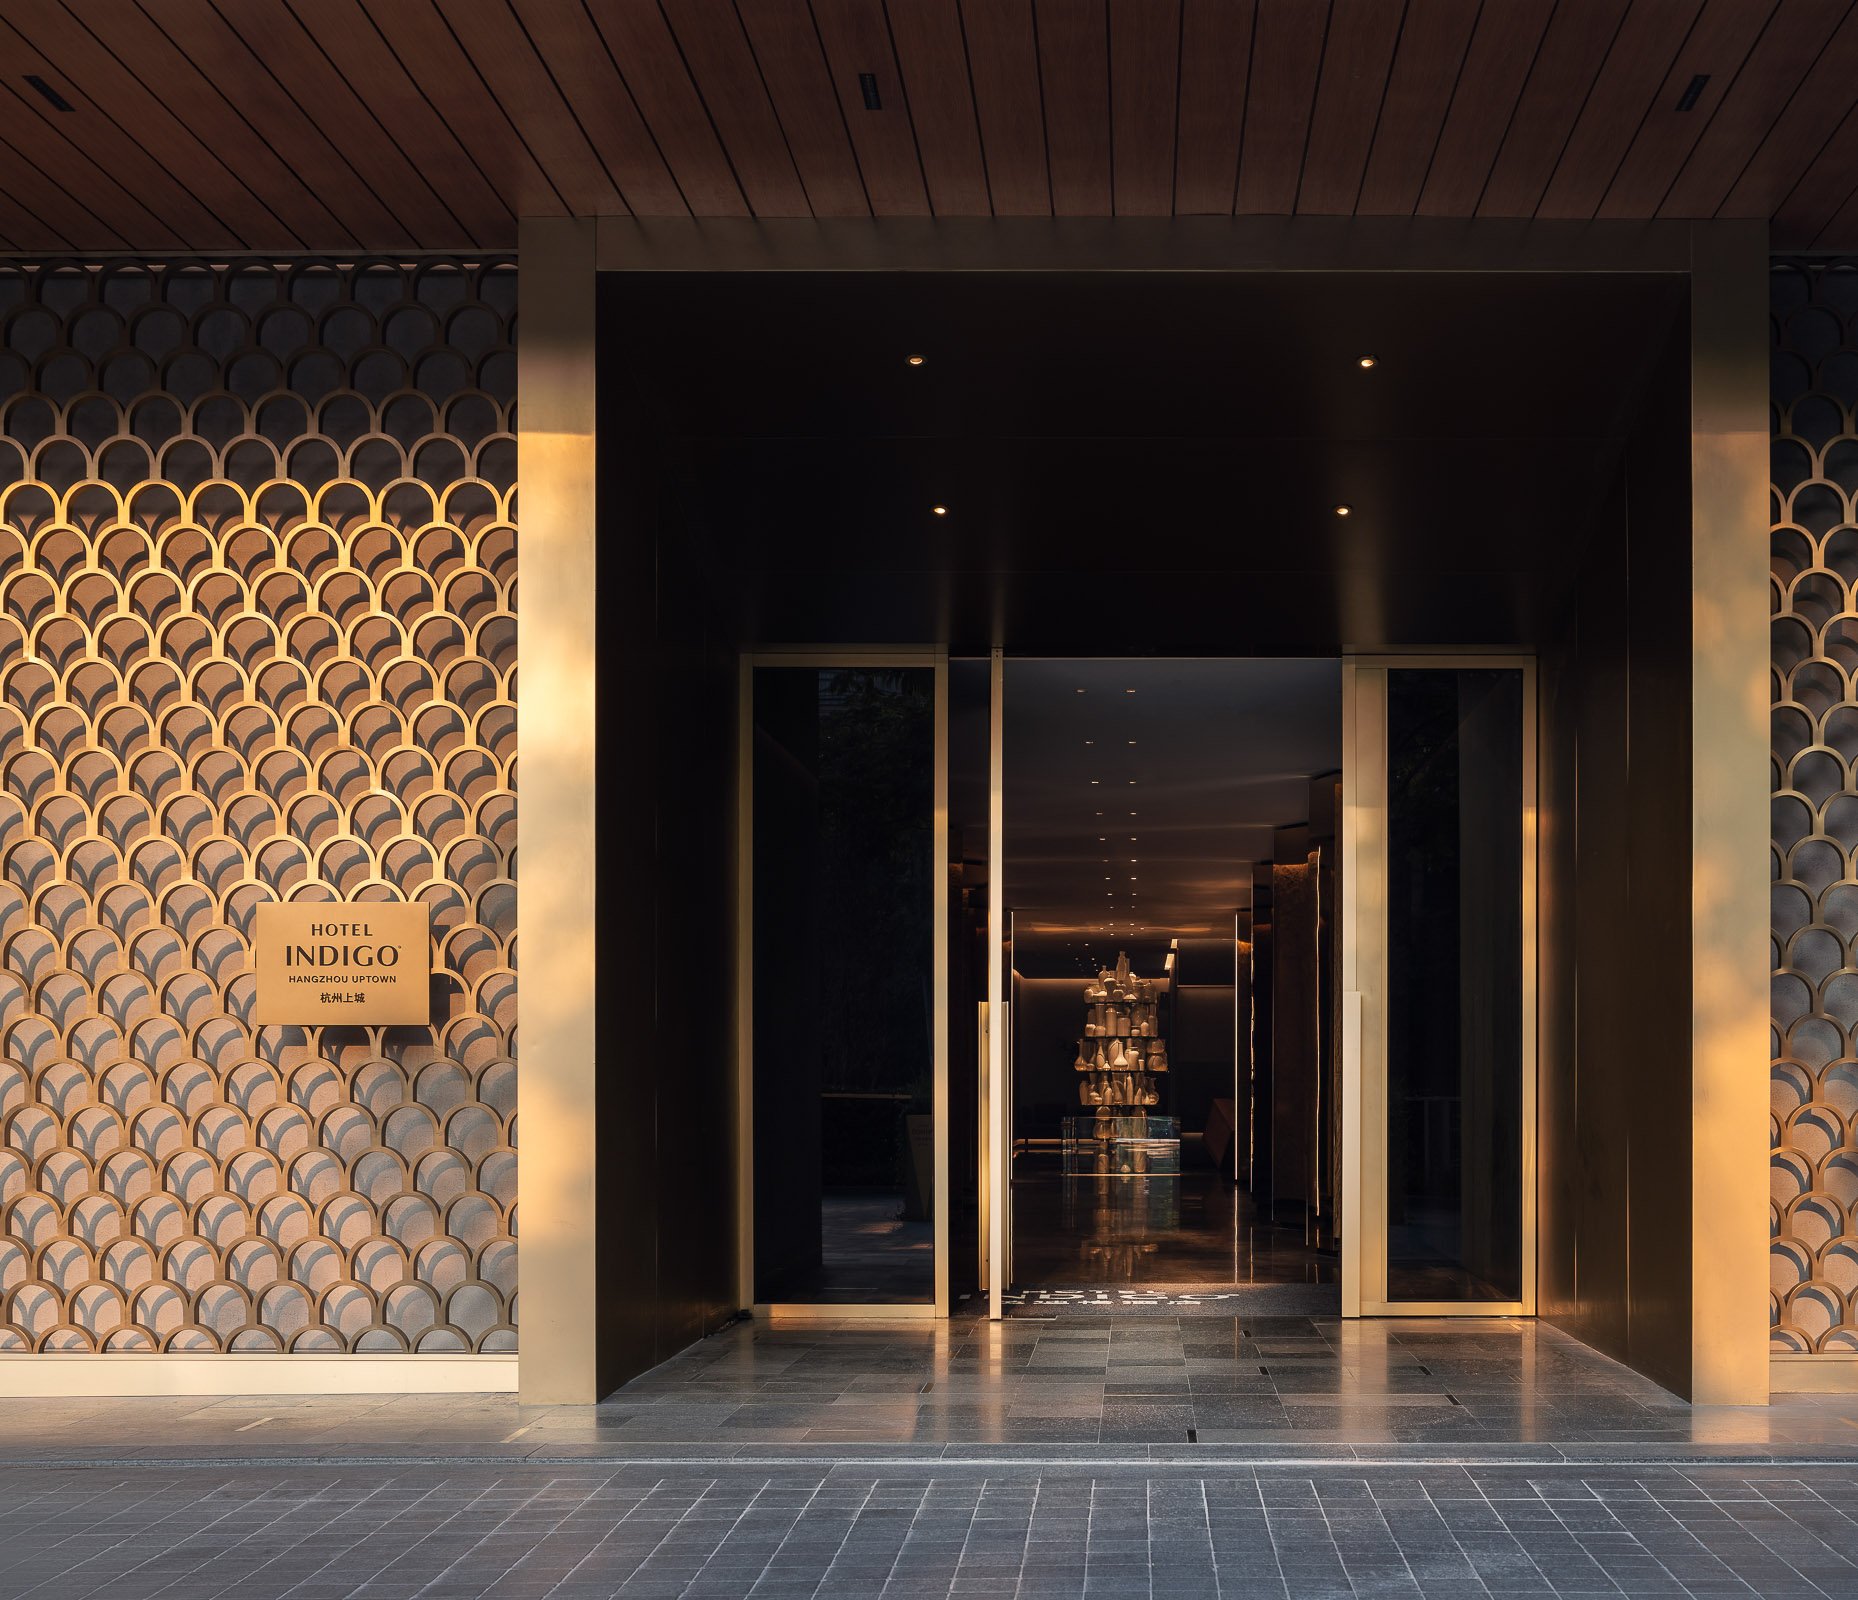  Hotel Indigo Hangzhou Uptown, situated in the picturesque West Lake scenic area, is more than just a hotel; it's a journey through time and culture. The design concept seamlessly weaves the intricate threads of history, art, and modern luxury, creat